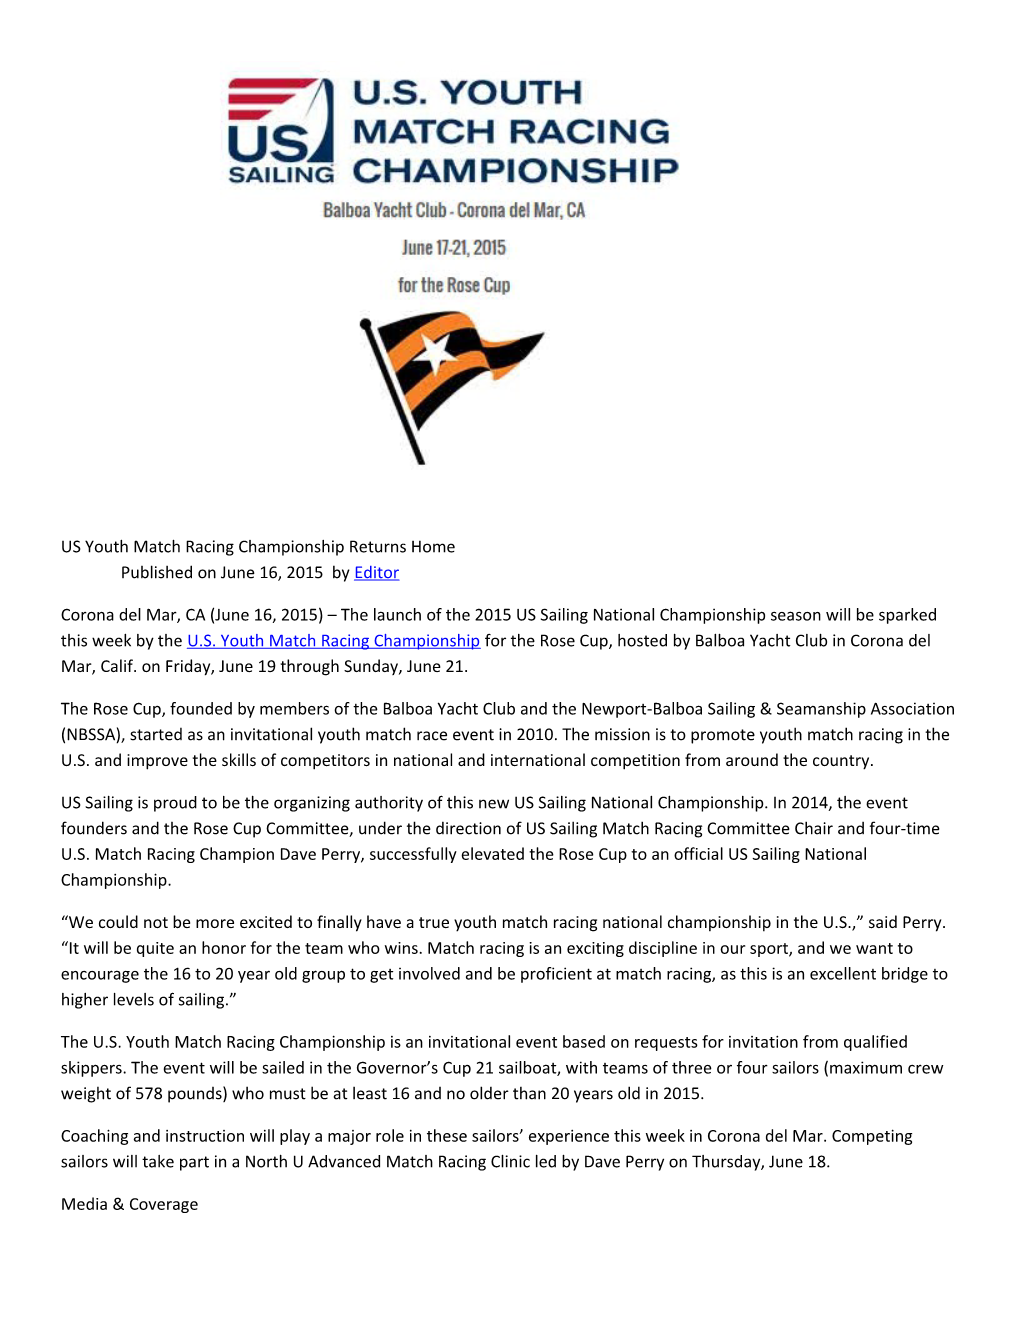 US Youth Match Racing Championship Returns Home Published on June 16, 2015 Byeditor